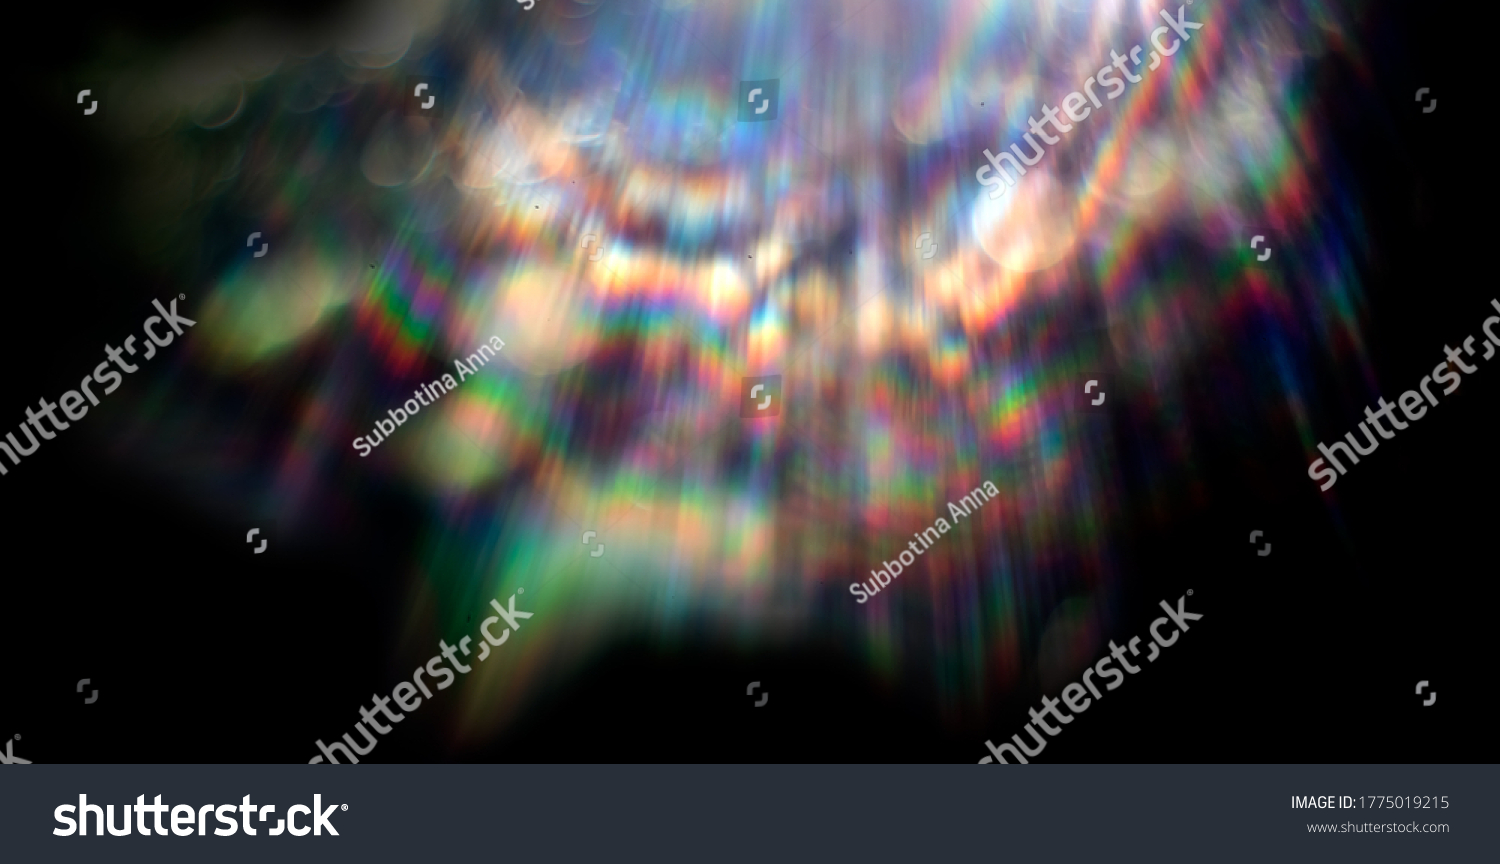 Lens flare effect on black background. Abstract Sun burst, sunflare for screen mode using. Sunflares nature abstract rainbow colourful backdrop, blinking sun burst, lens flare optical rays. #1775019215